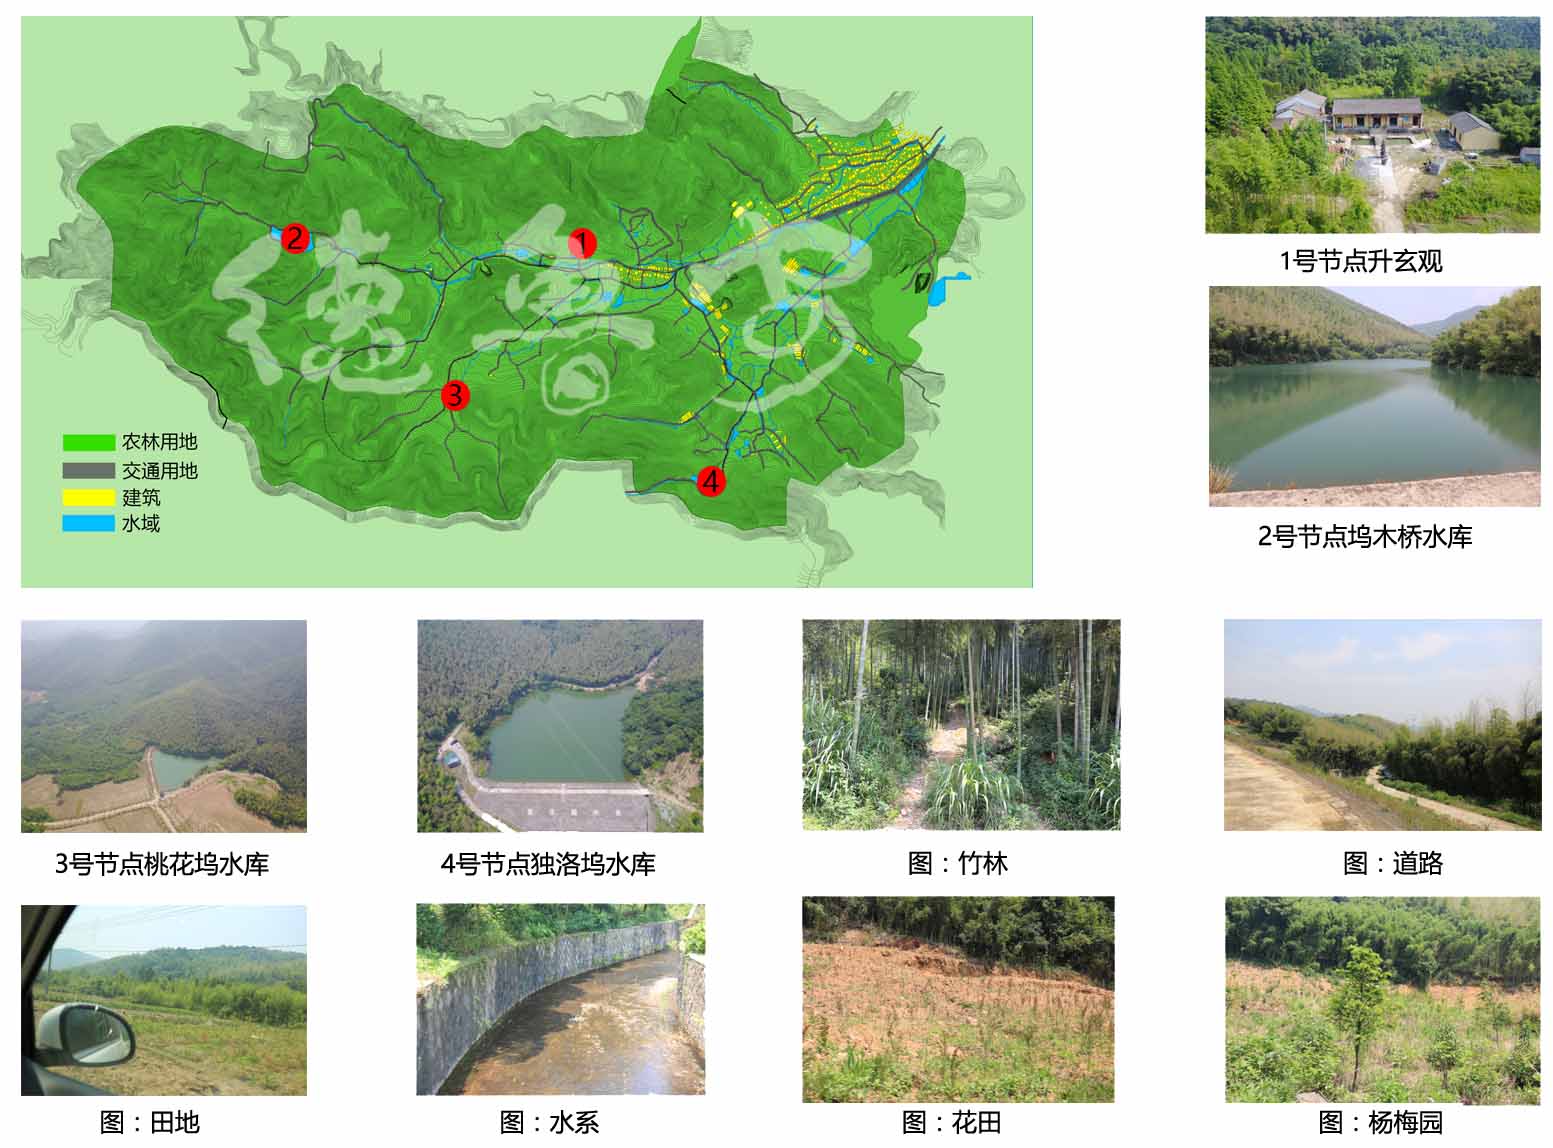 Conceptual master plan of Xili st<x>yle Valley Scenic Area in Zhejiang Province(图11)